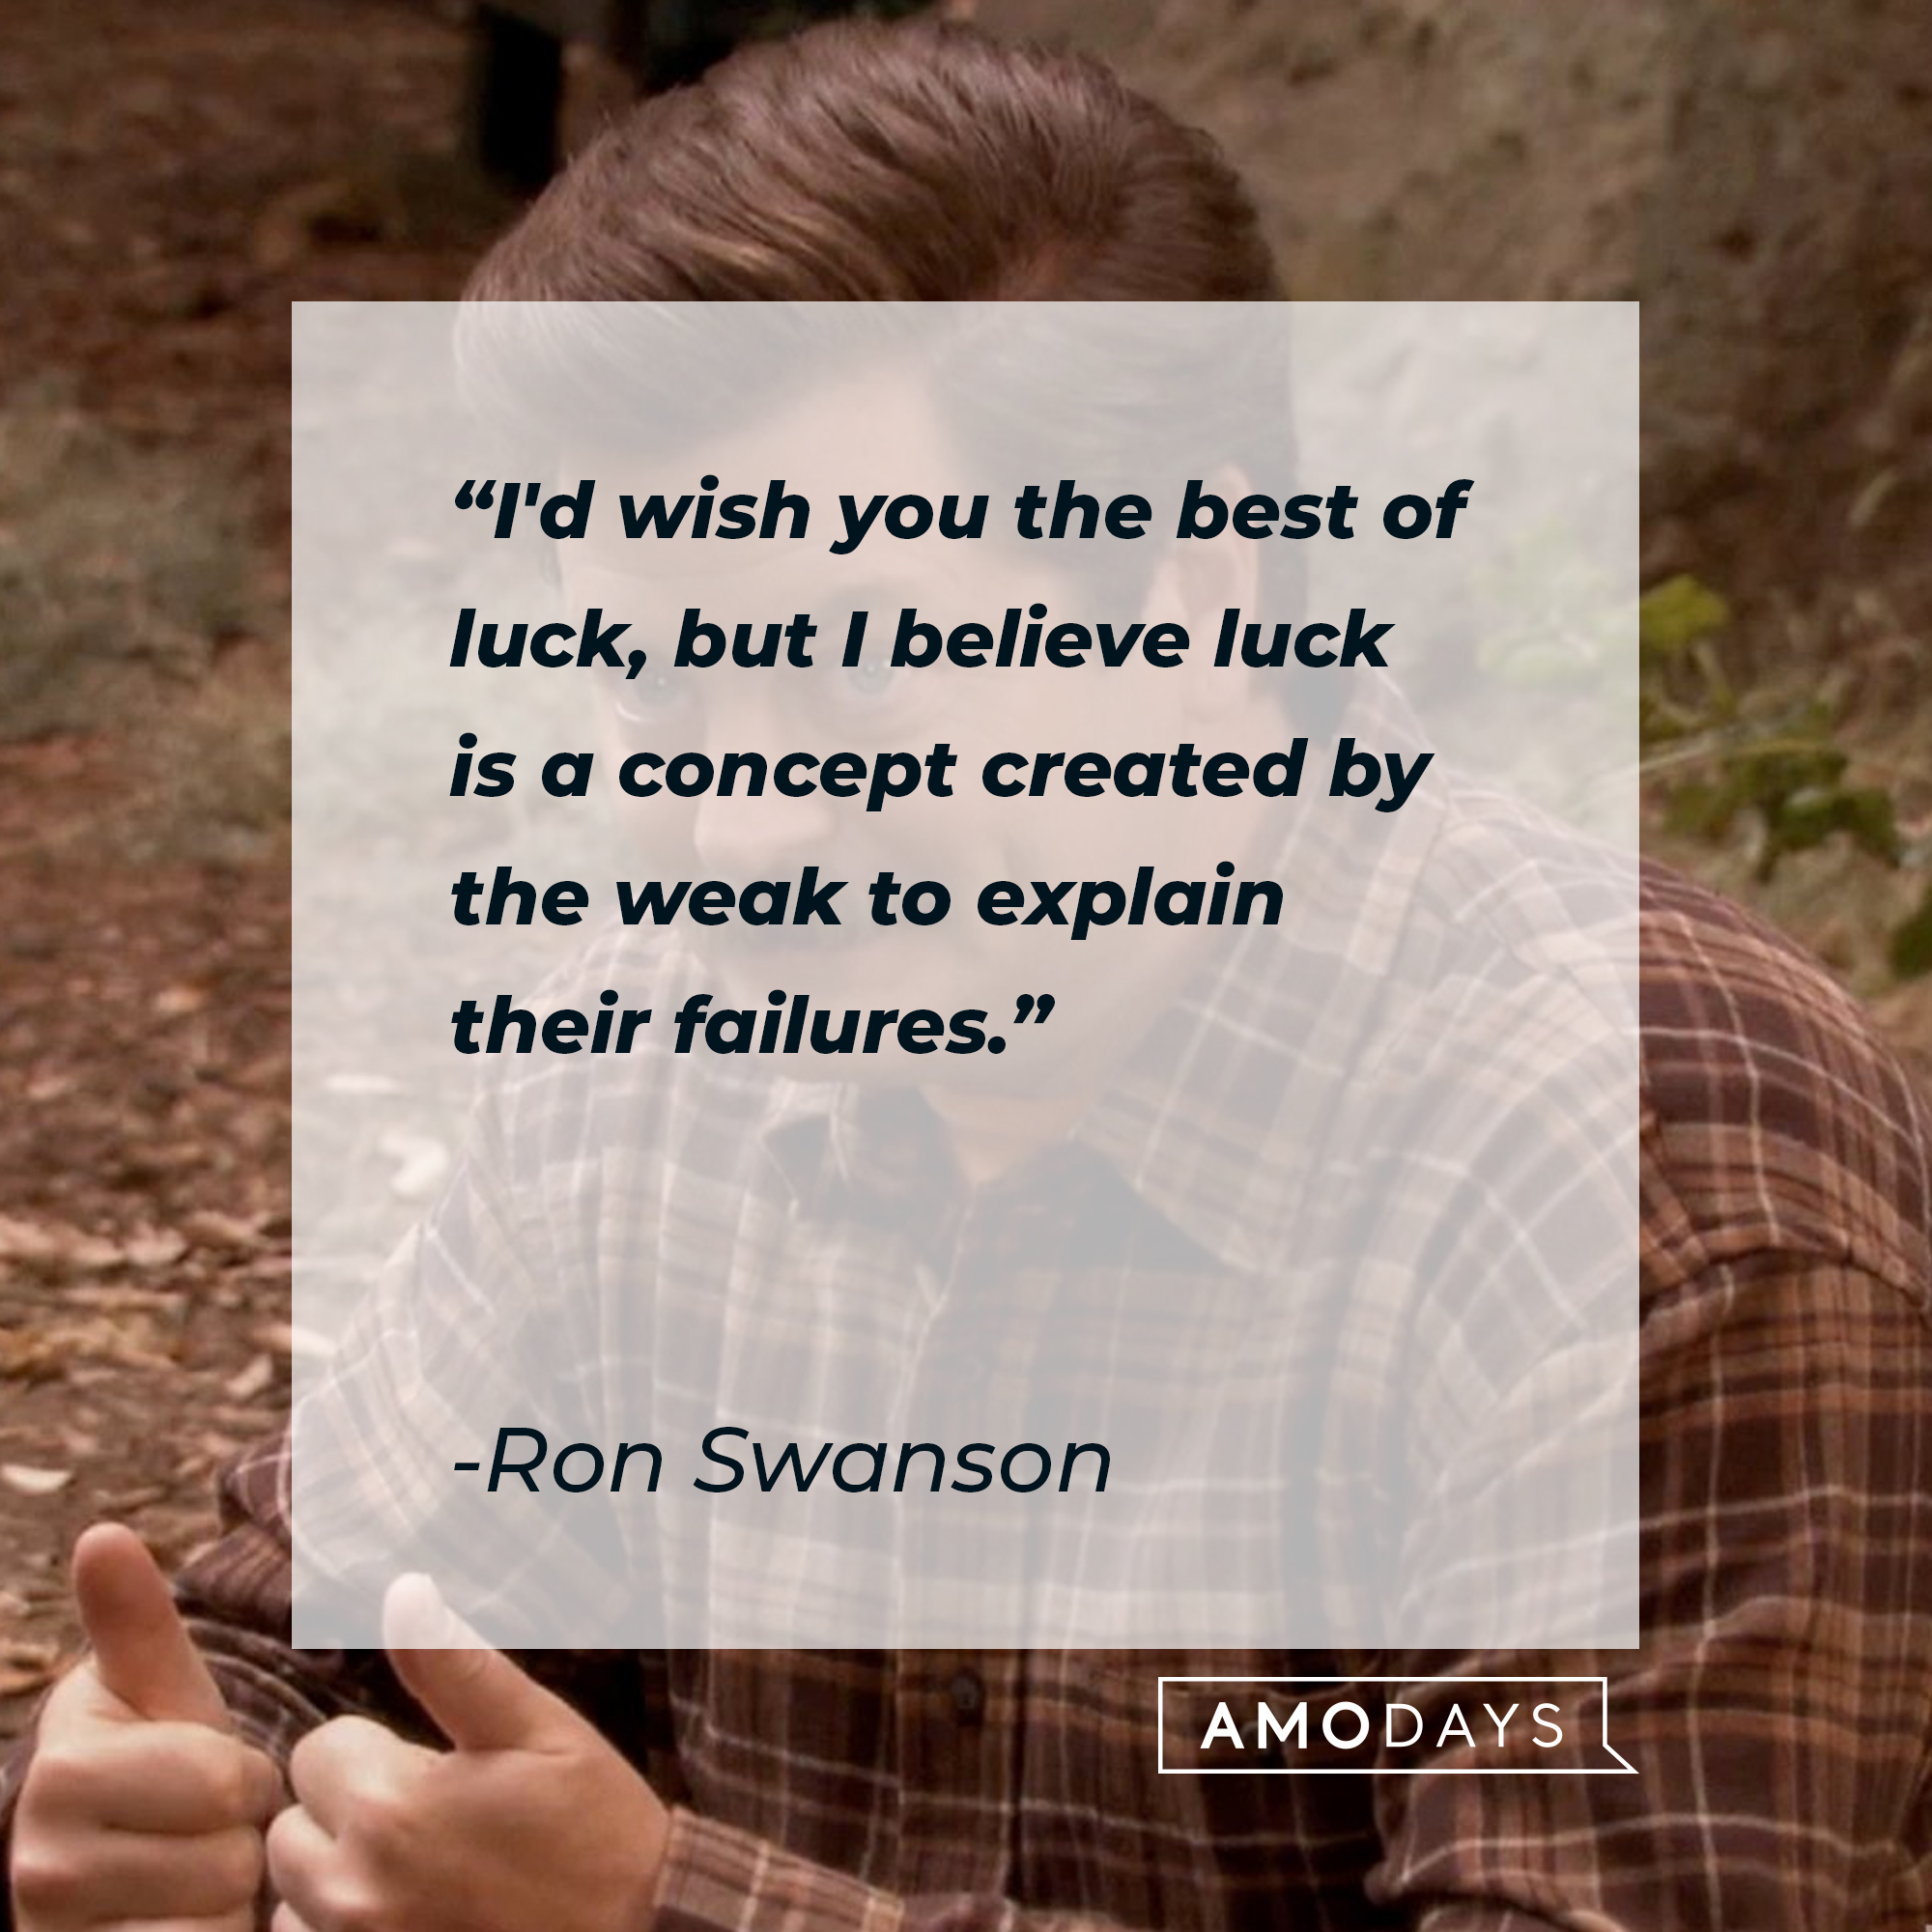 Ron Swanson’s quote: "I'd wish you the best of luck, but I believe luck is a concept created by the weak to explain their failures." | Image: Facebook.com/parksandrecreation